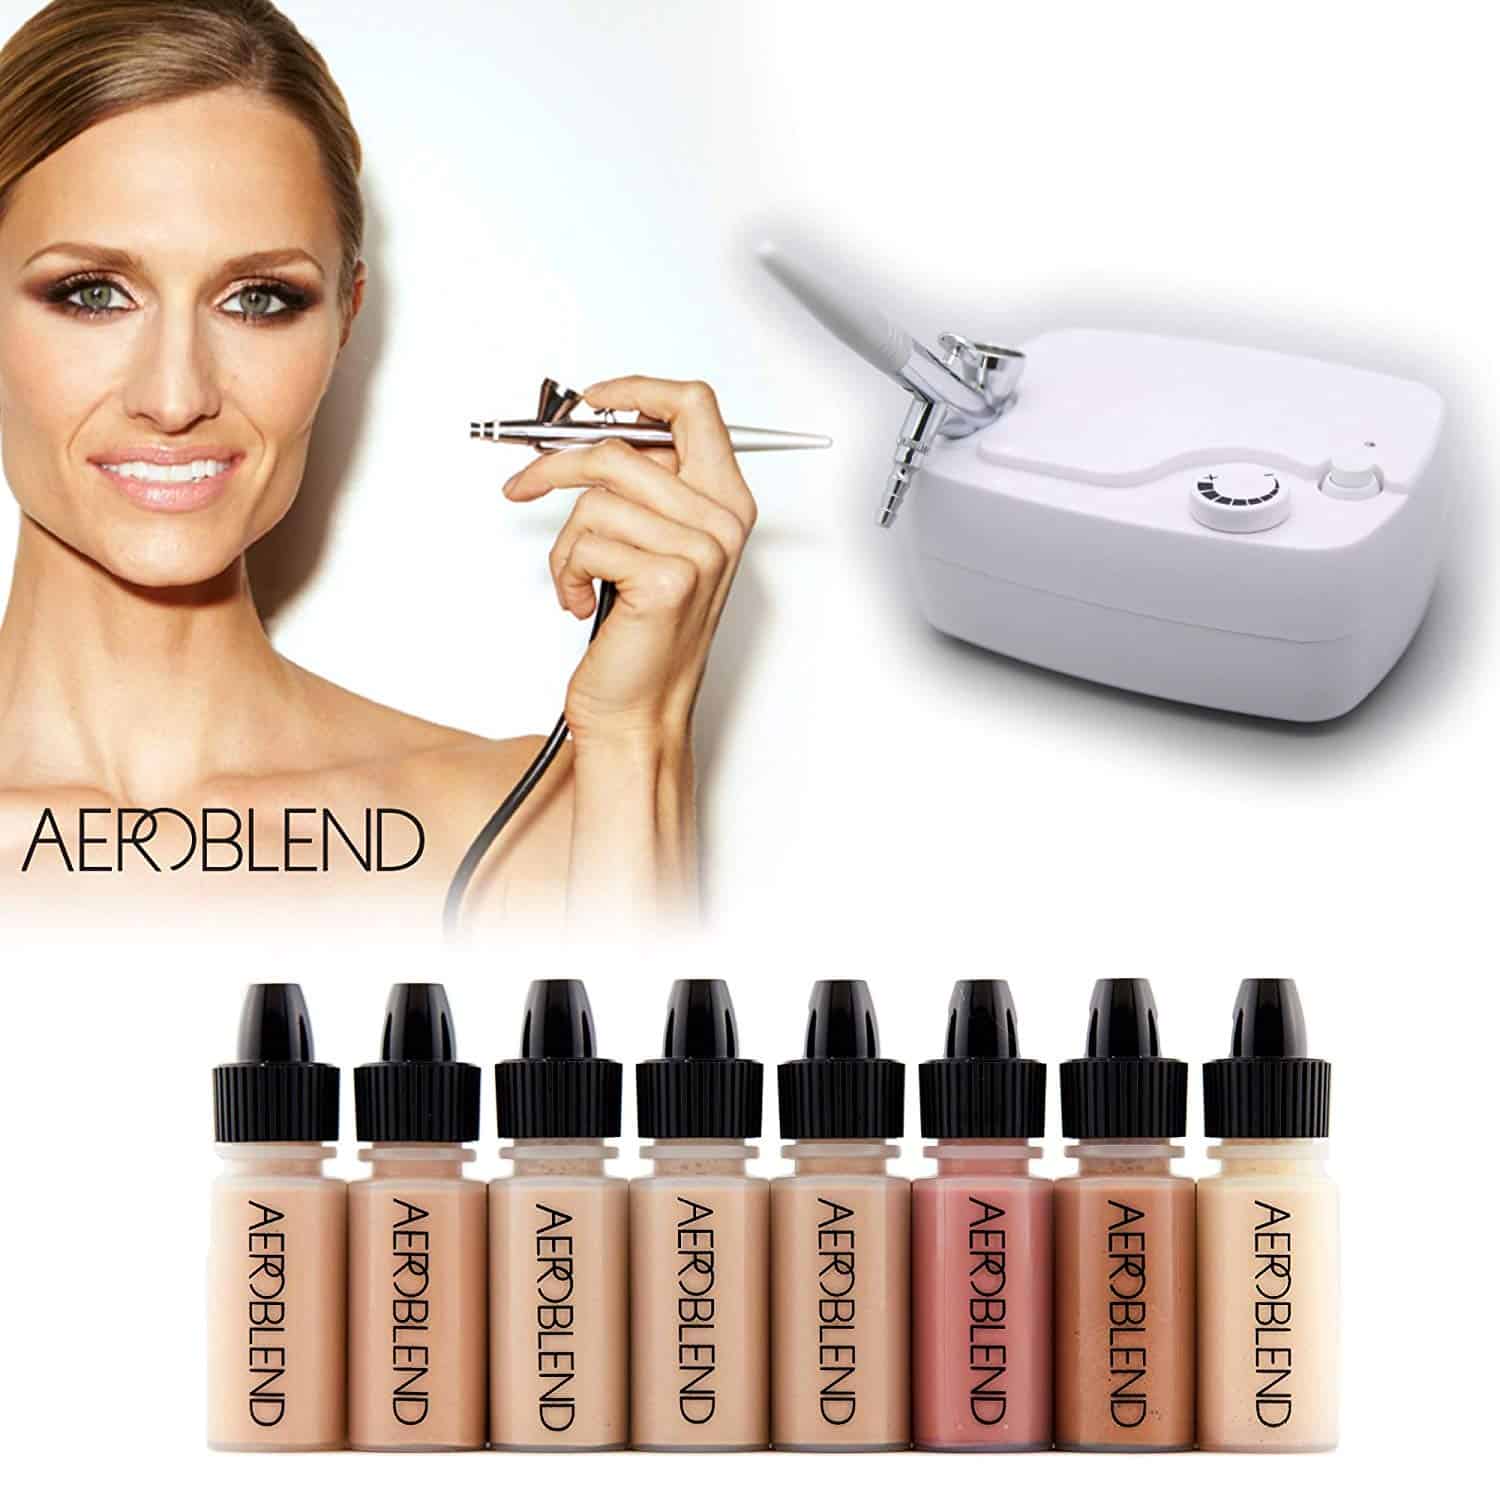 Top 10 Best Airbrush Makeup Kit  Reviews Wild About Beauty